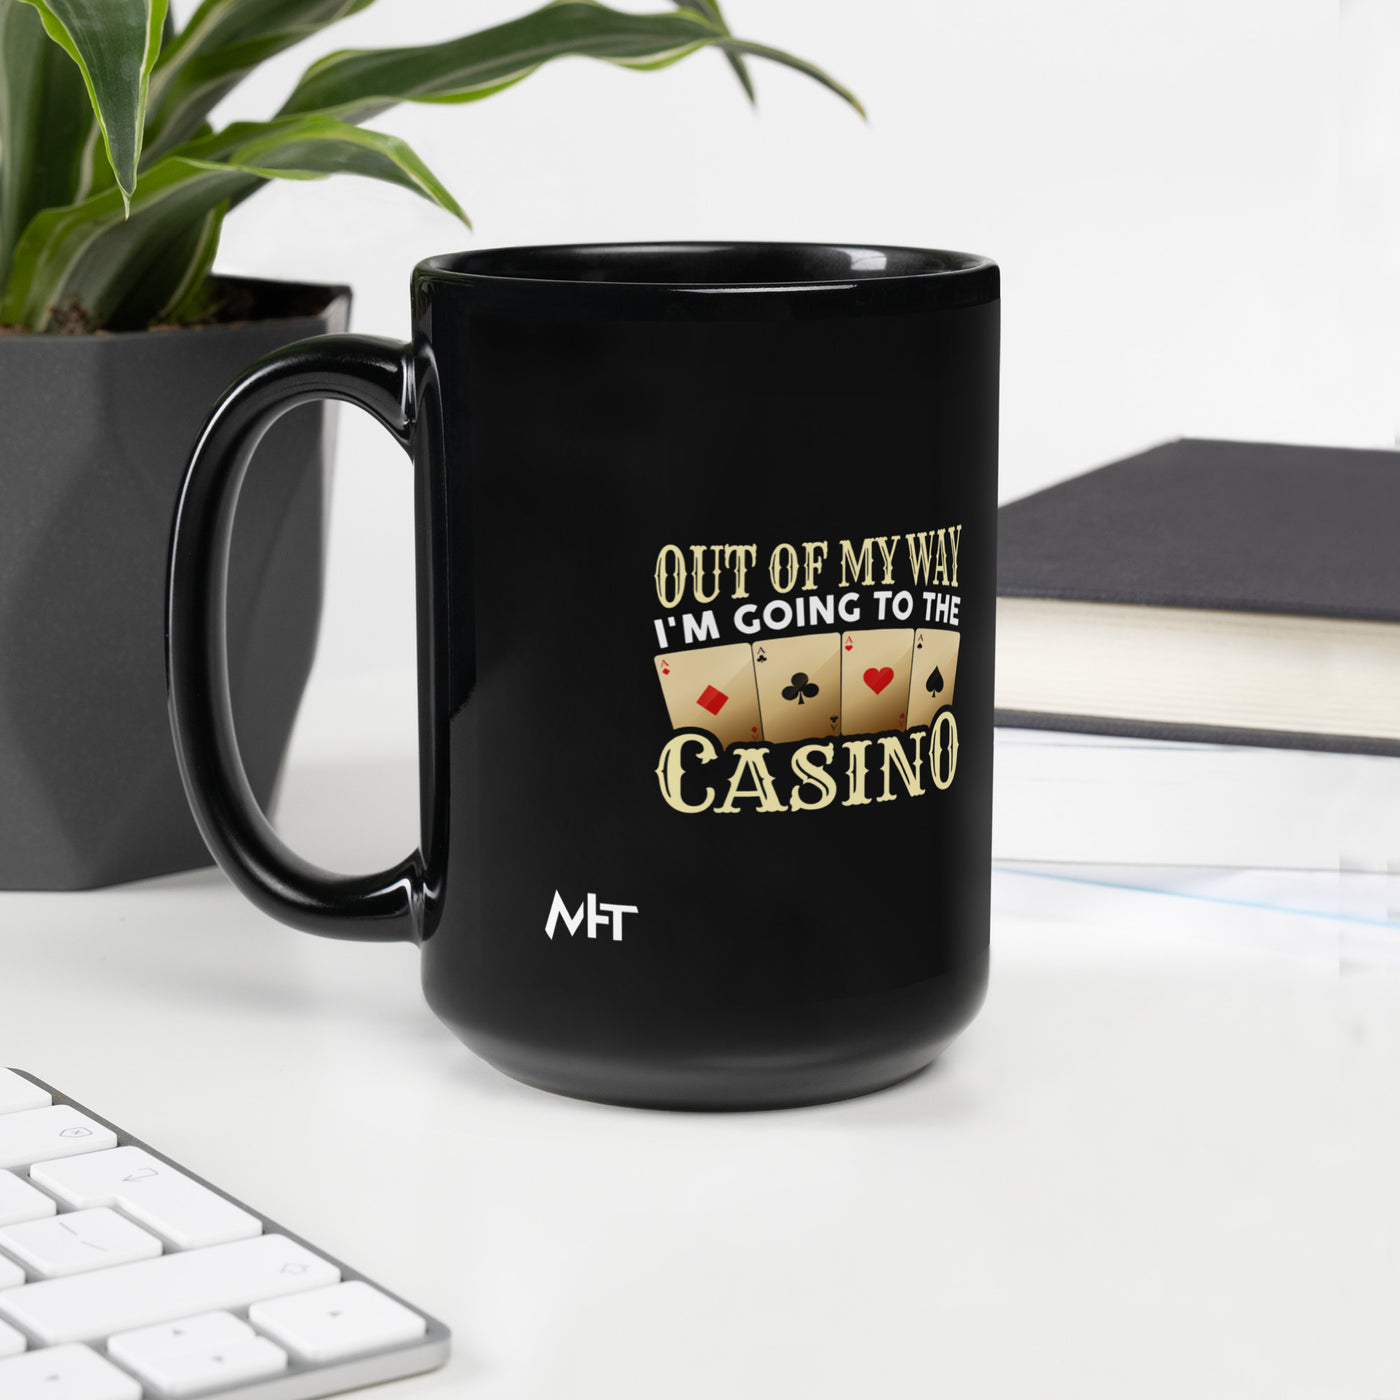 Out of My way; I am Going to the Casino - Black Glossy Mug